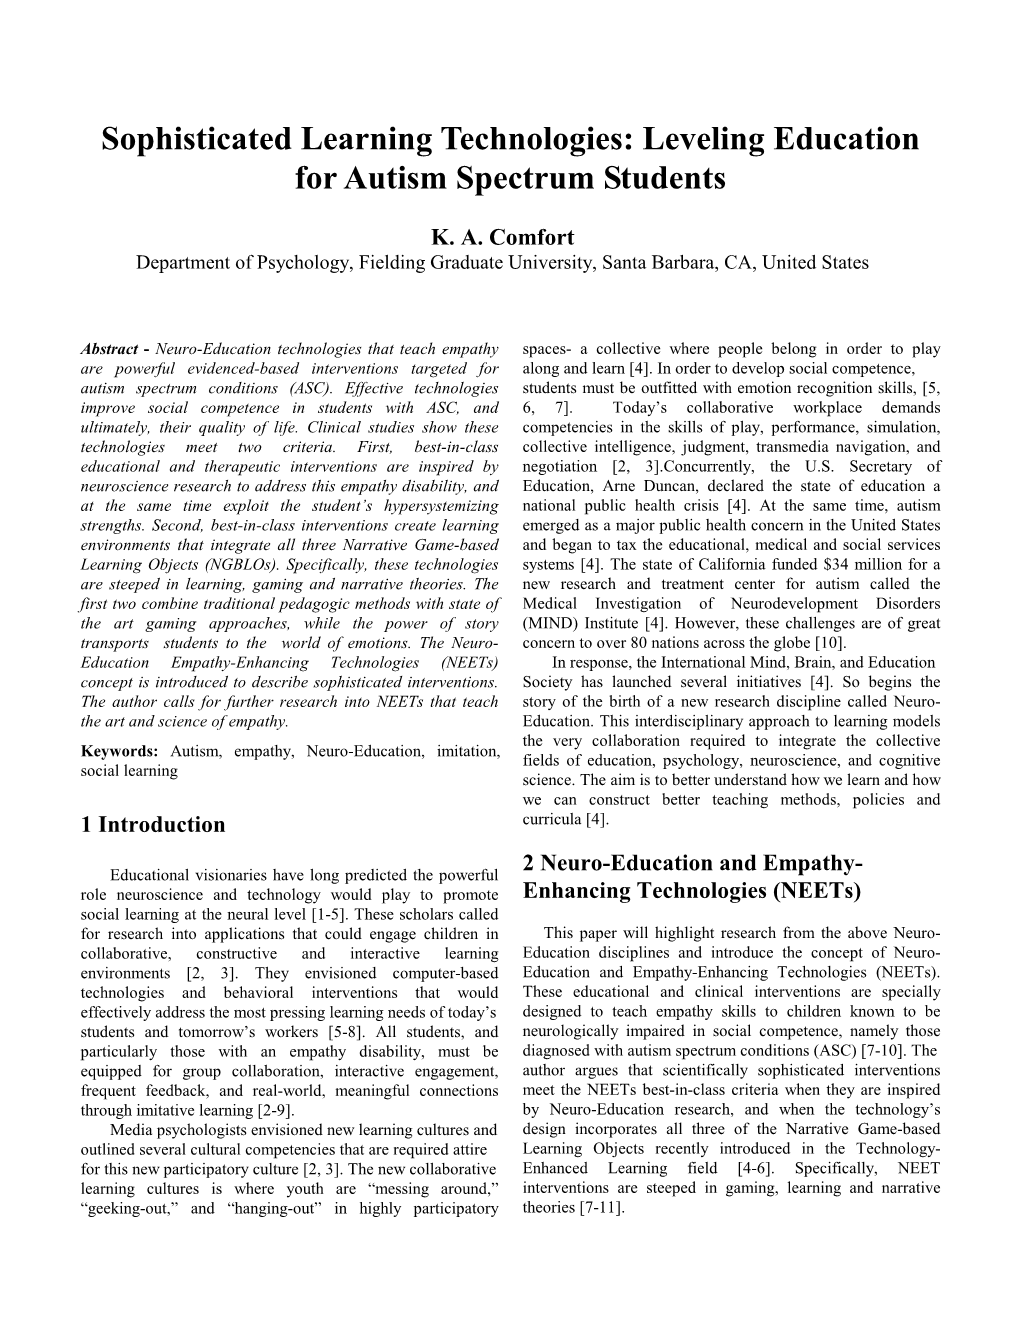 Leveling Education for Autism Spectrum Students